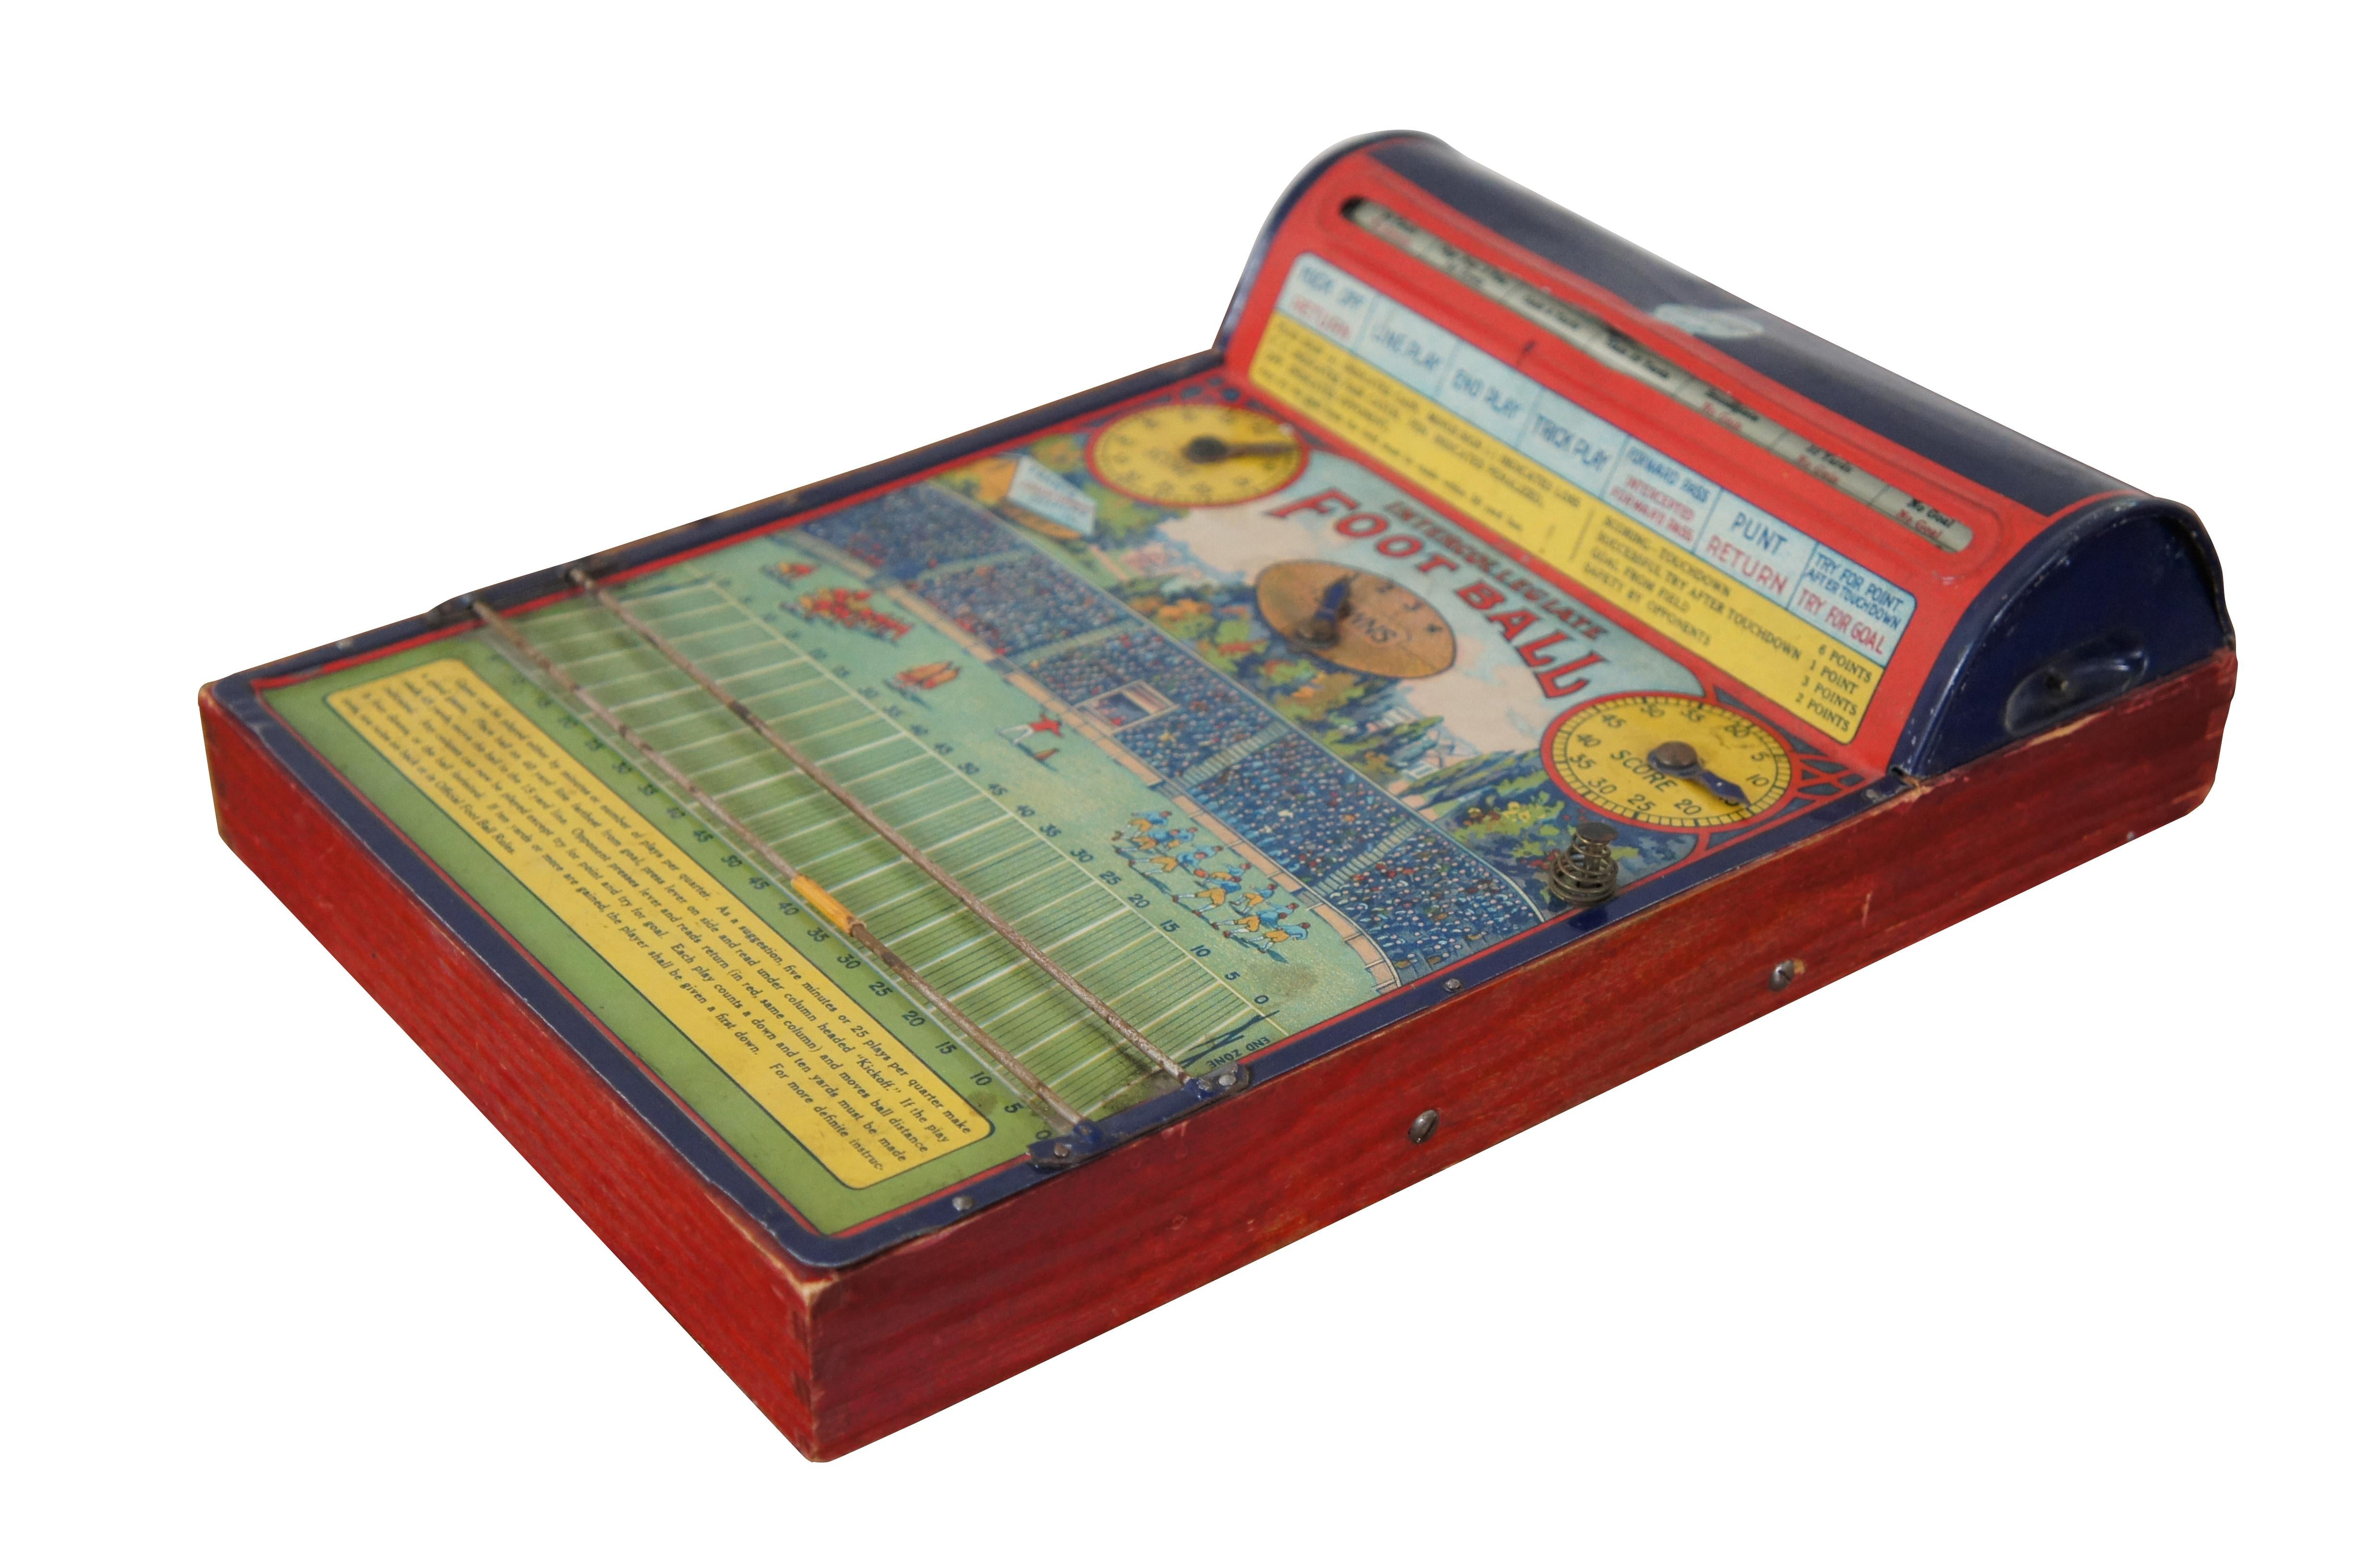 Antique 1920’s Intercollegiate Football table top spinner game by Frantz Manufacturing Company of Sterling, Illinois. Tin body on a wooden base frame, with lithograph printed details and instructions. Mechanism that spins the play wheel is